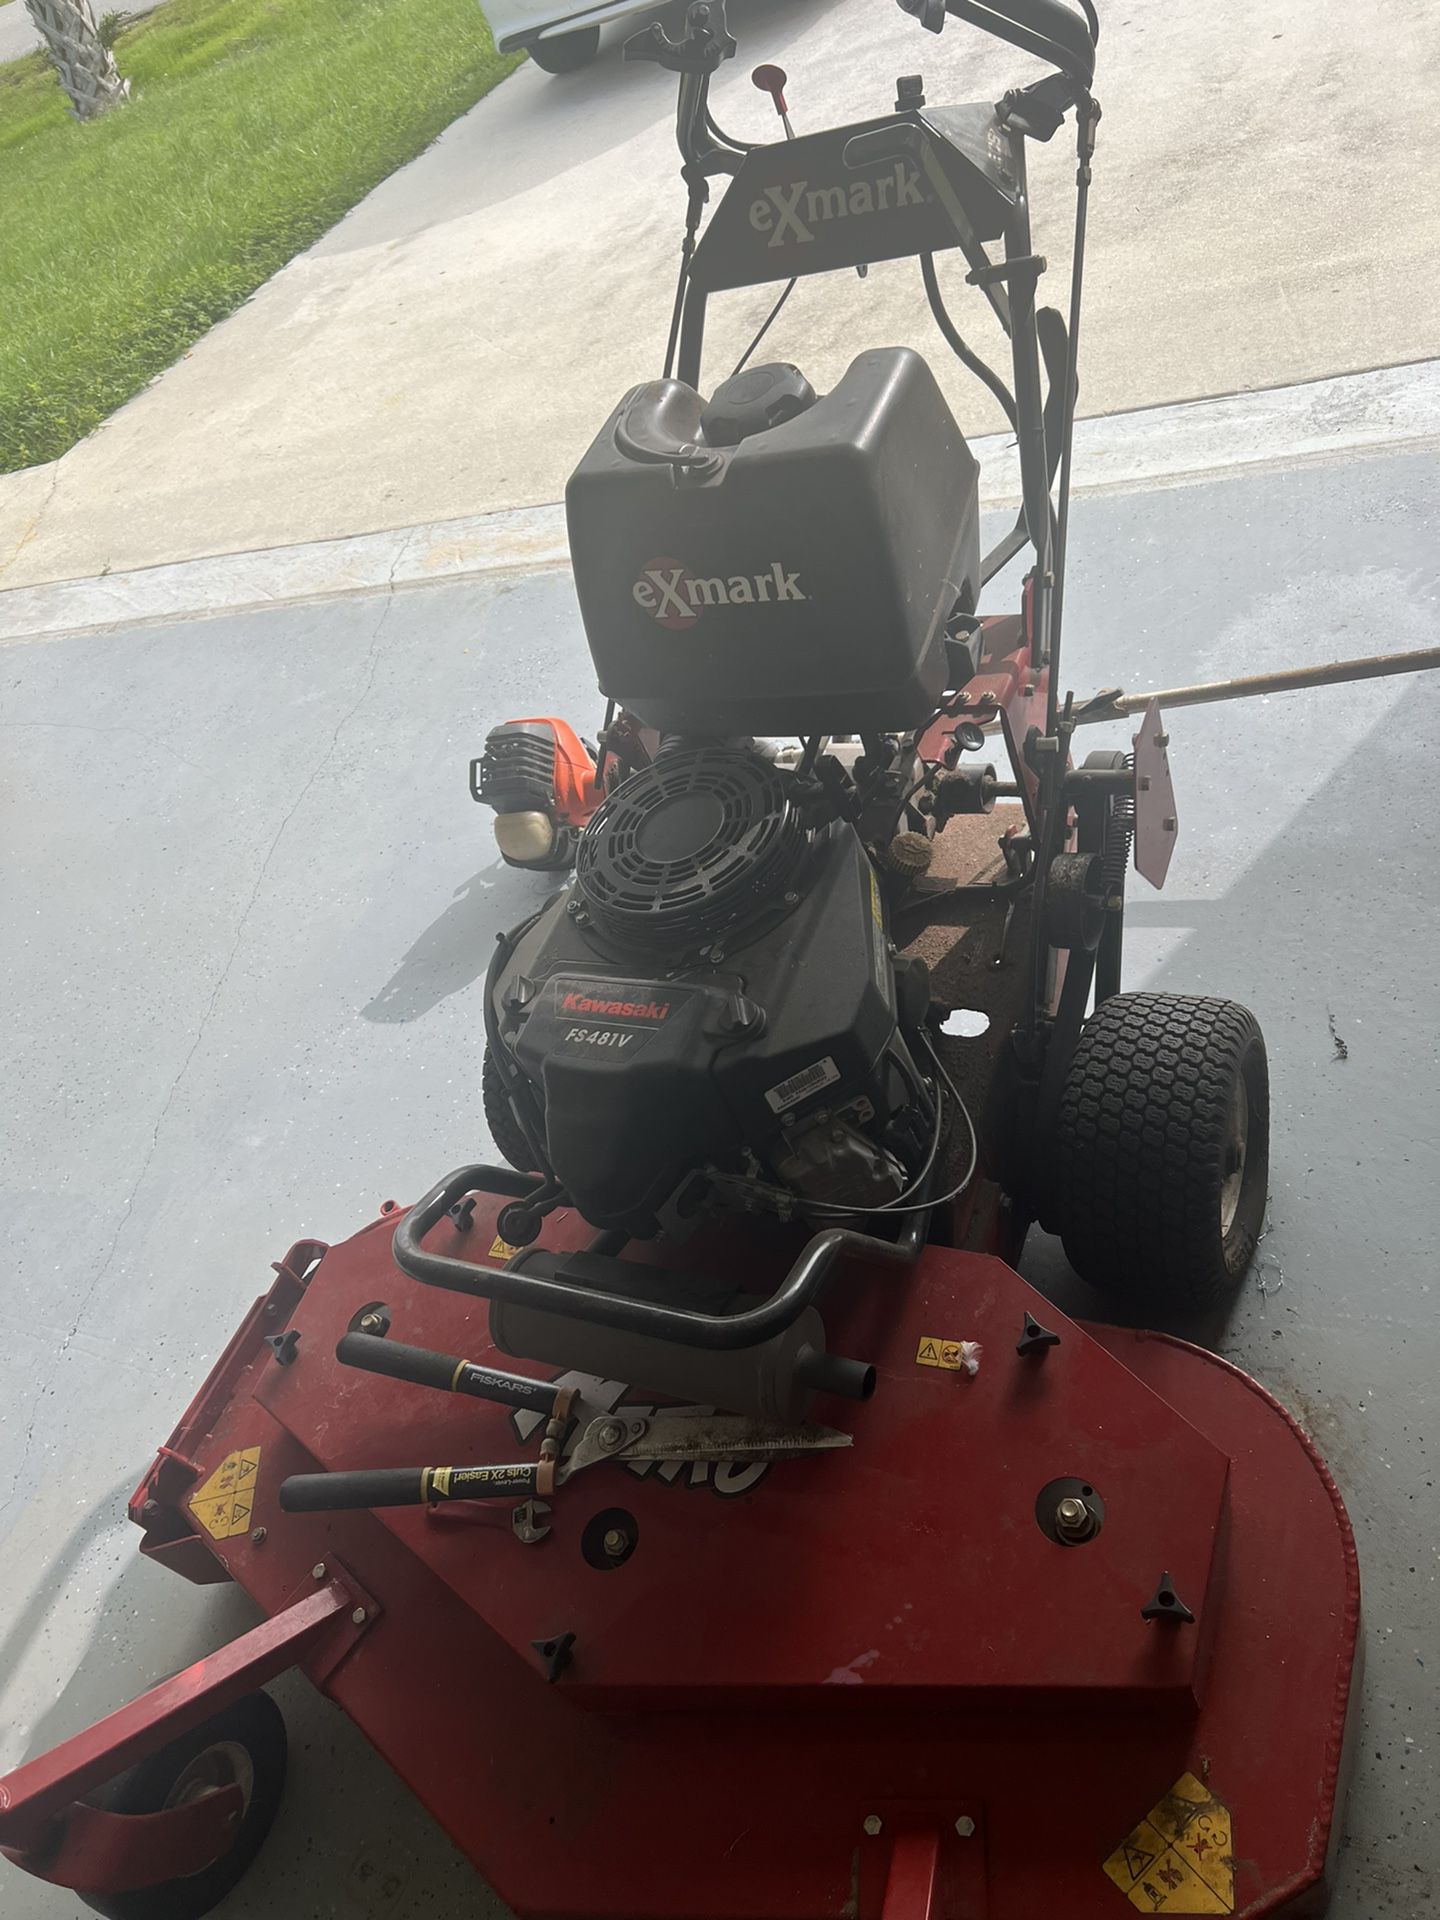 EXMARK LAWN MOWER FOR SALE!!